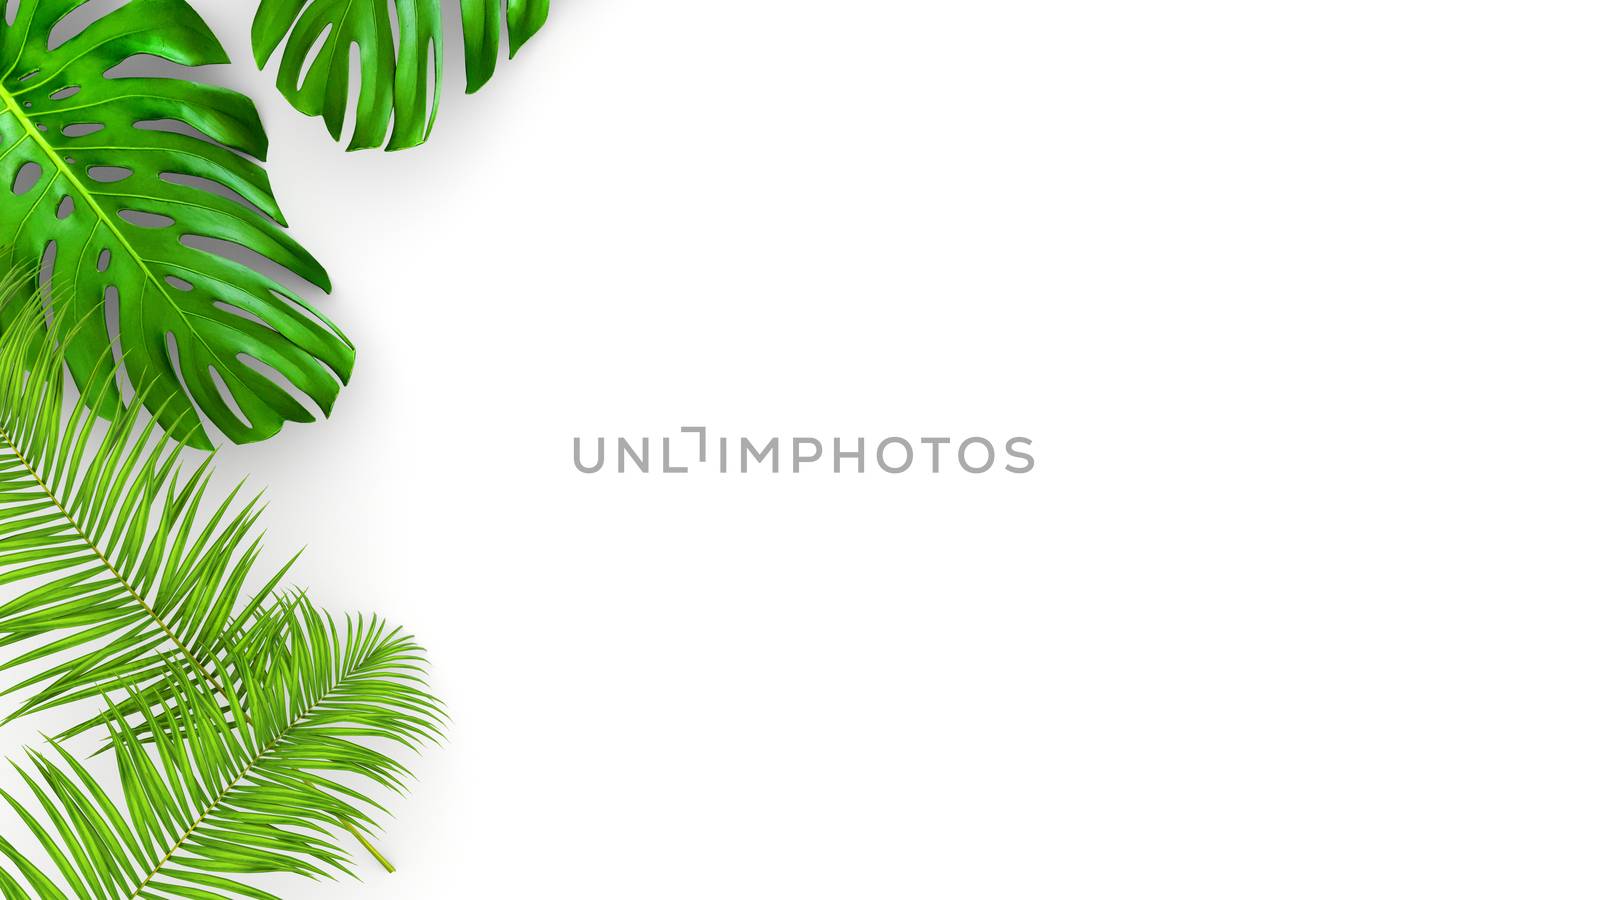 3D render of realistic palm leaves on white background for cosmetic ad or fashion illustration. Tropical frame exotic banana palm. Sale banner design.